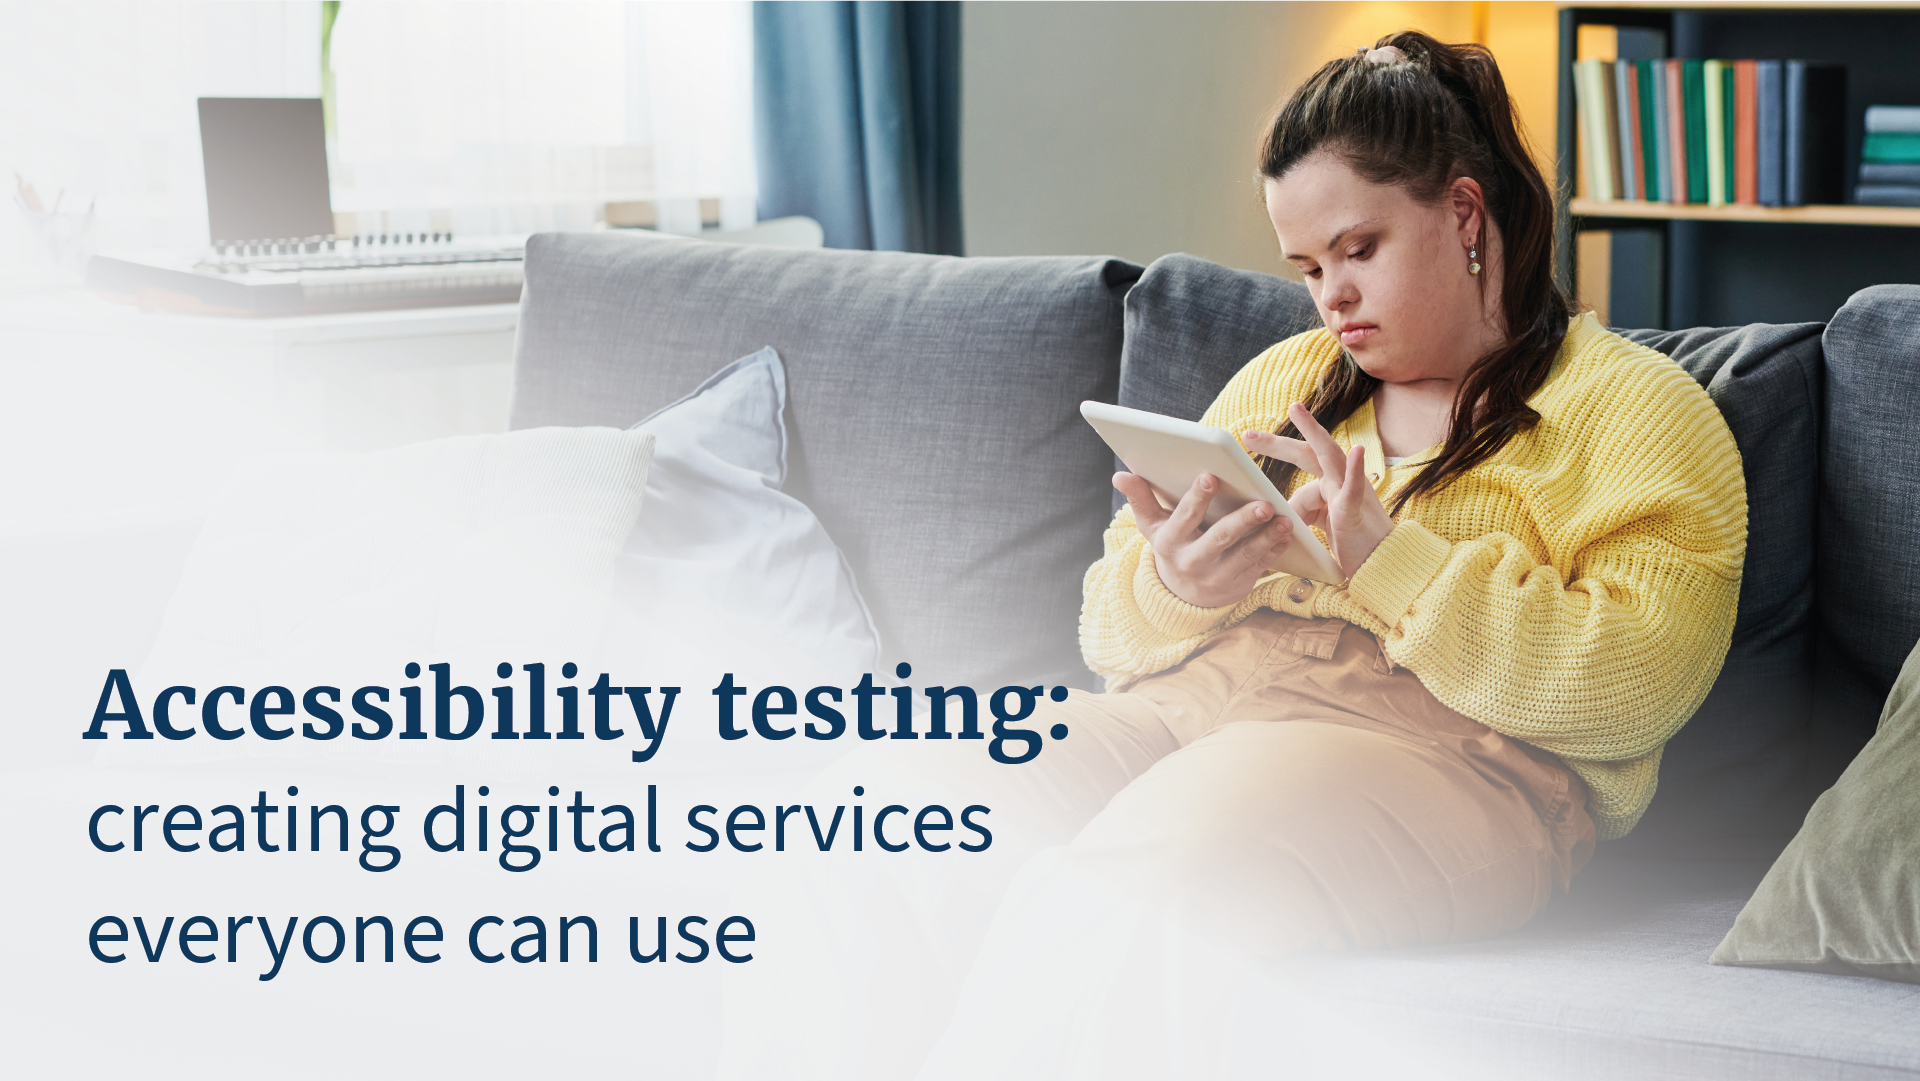 Person with intellectual disability using tablet device. Text: Accessibility testing: creating digital services everyone can use